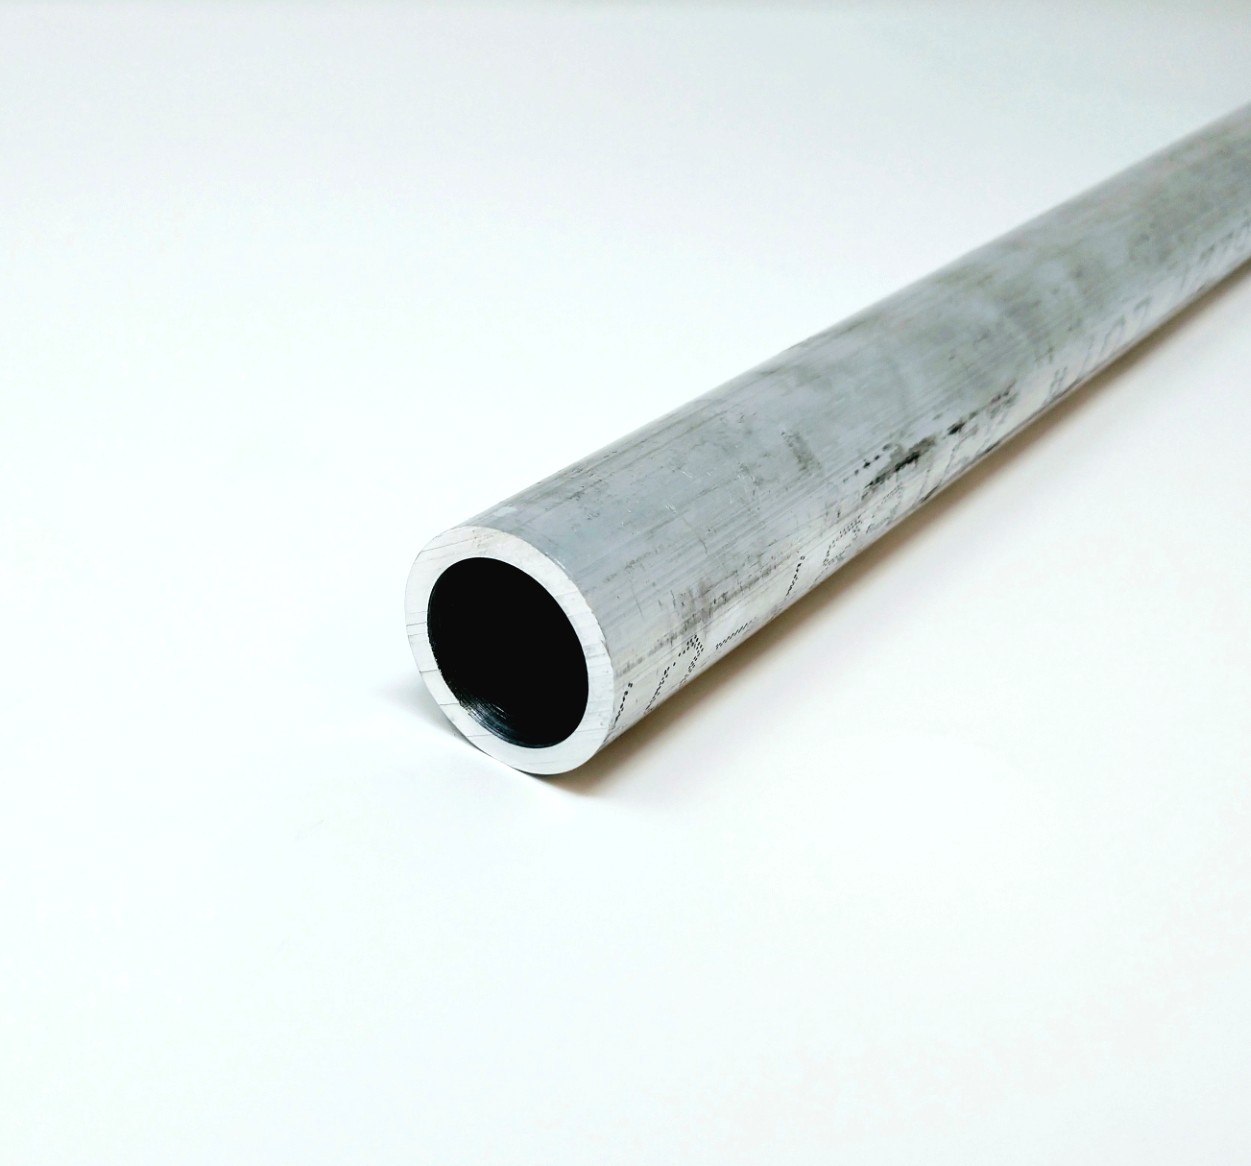 Aluminum 6061-T6 Extruded Pipe Schedule 80 1-1/4 Nominal 1-2/3 OD 1.278 ID 0.191 Wall 12 Length 